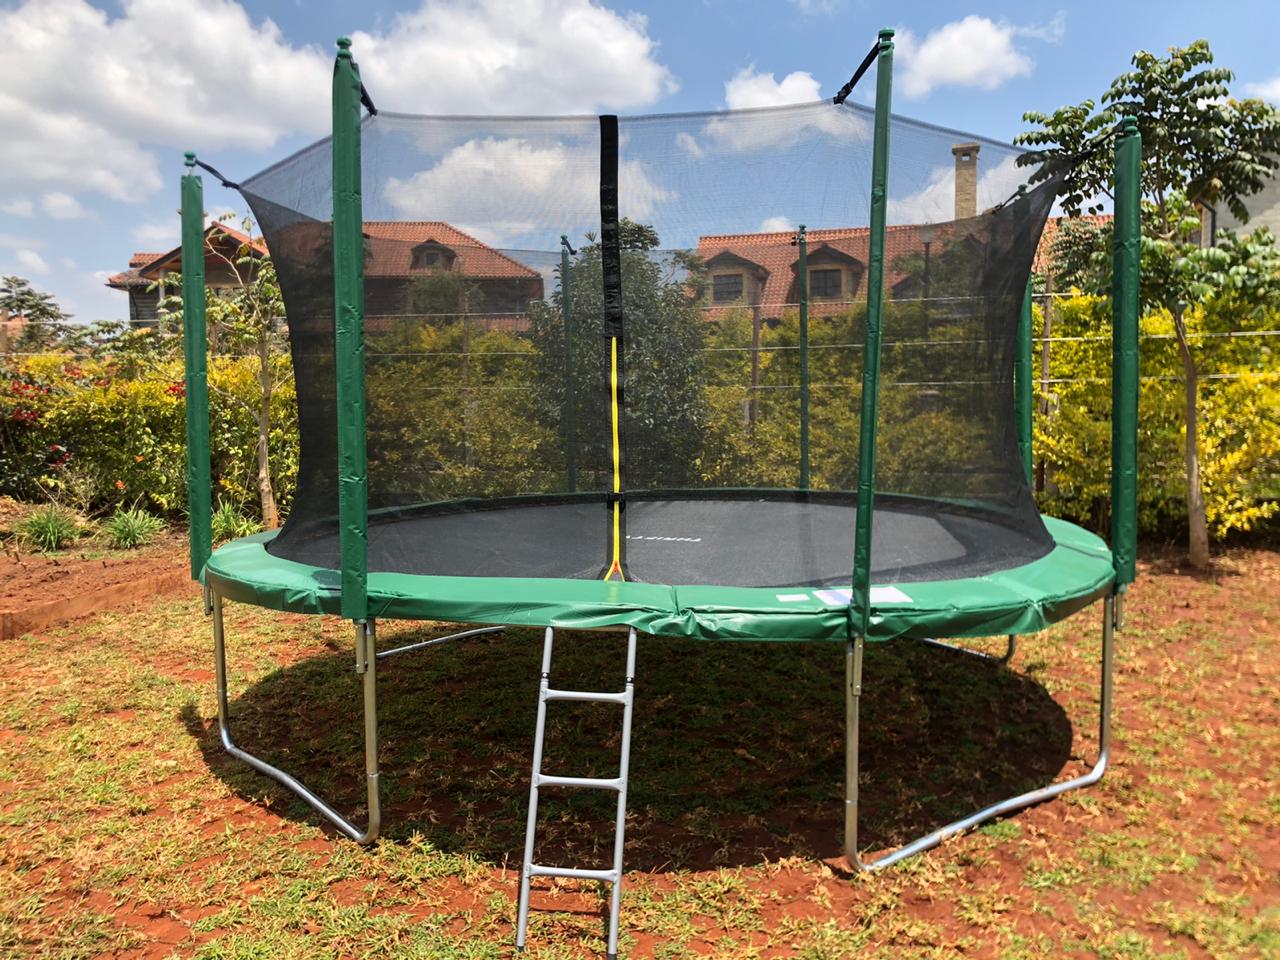 Towns Where You Can Find Trampolines for Sale